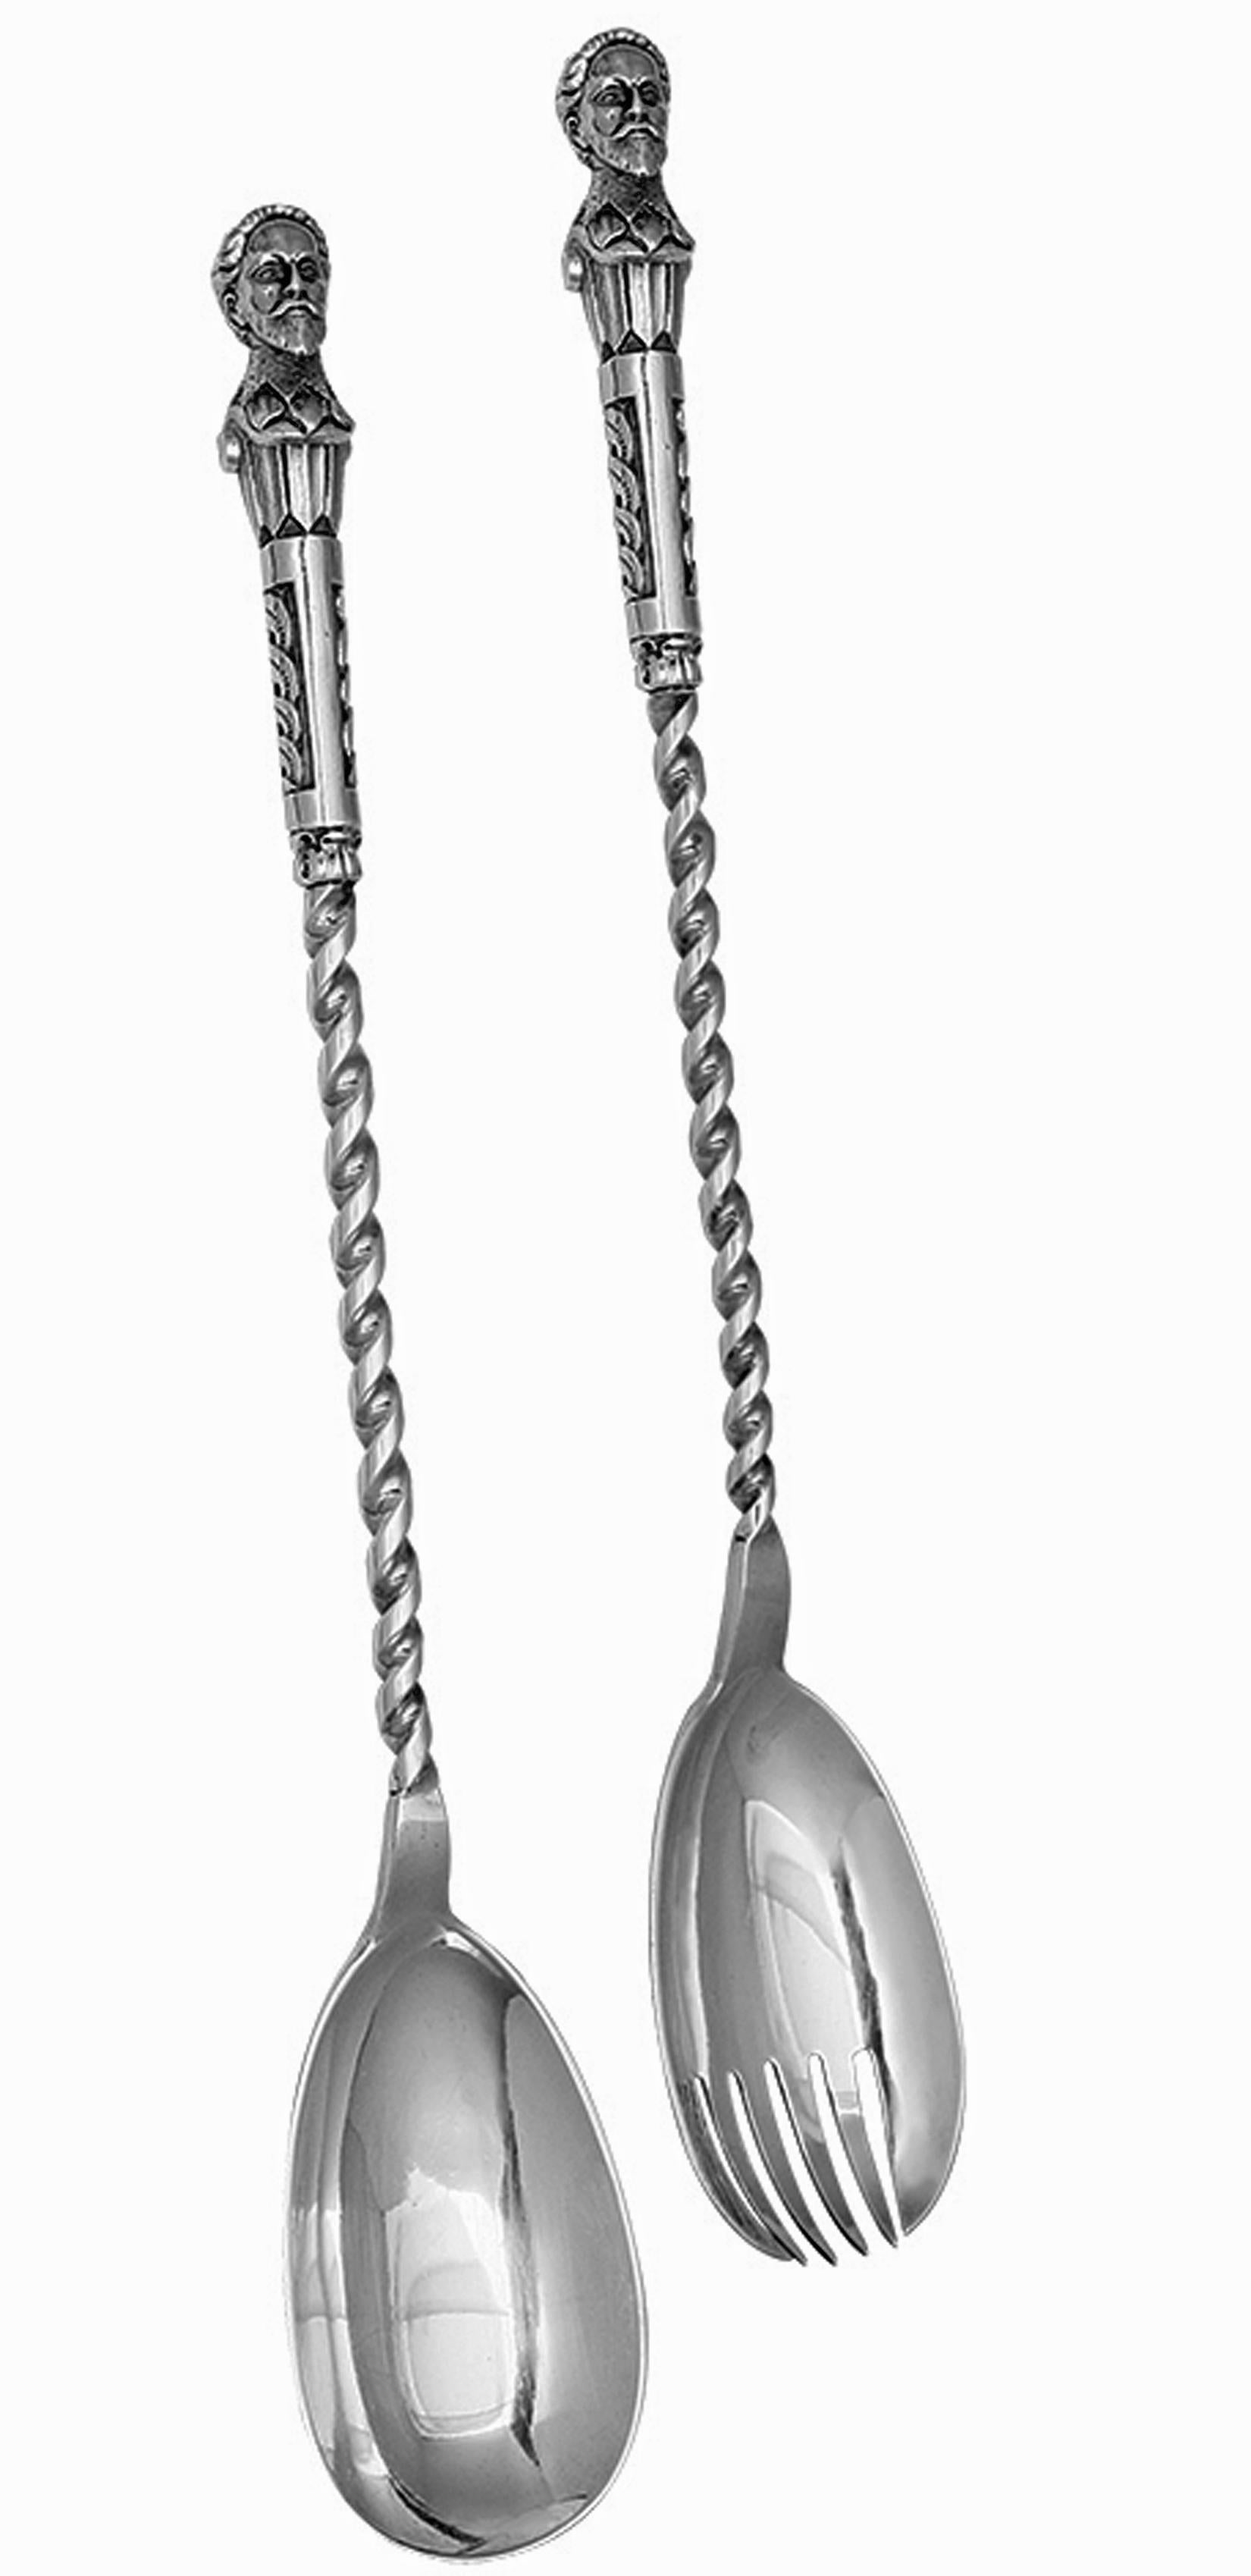 Rare pair of Sir Walter Raleigh antique silver servers, Newcastle 1882 Christian Reid. Large oval pear shape bowls, twist spiral stems with figure head terminals of Sir Walter Raleigh. Measures: Length 11.75 inches. Weight: 8.5 oz.